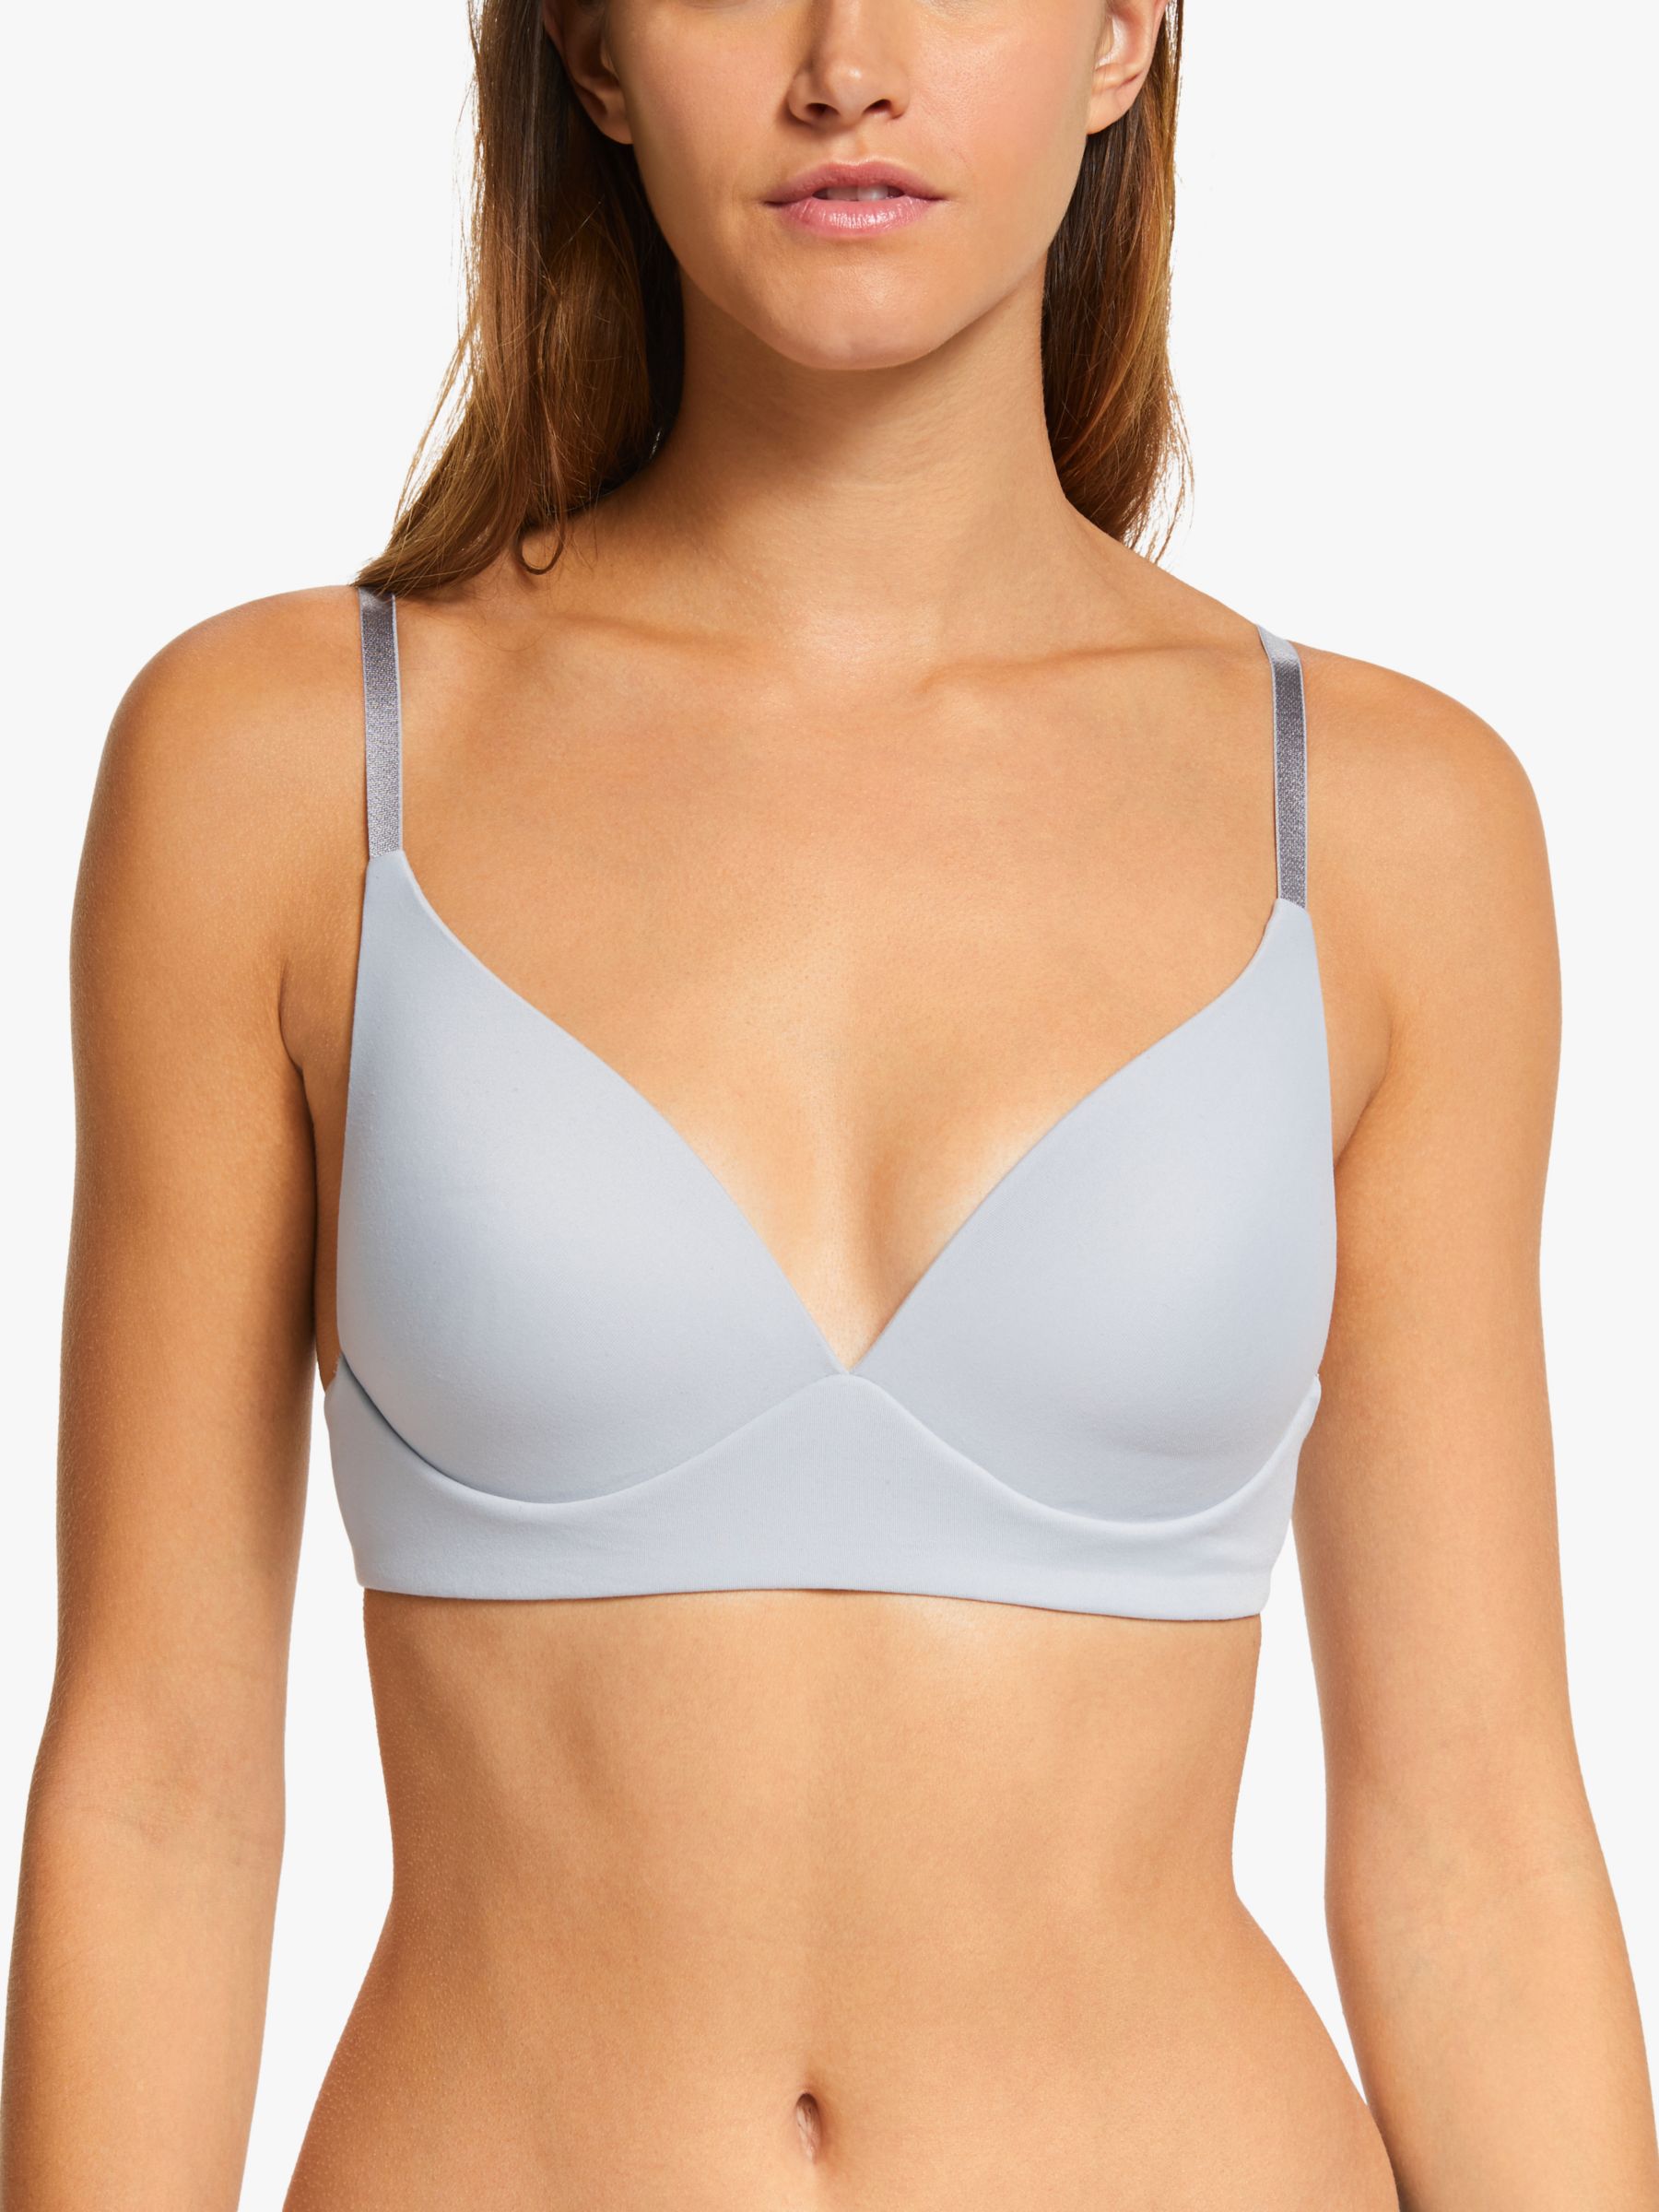 John Lewis ANYDAY Avery Non-Wired Lace Bra, Pink at John Lewis & Partners